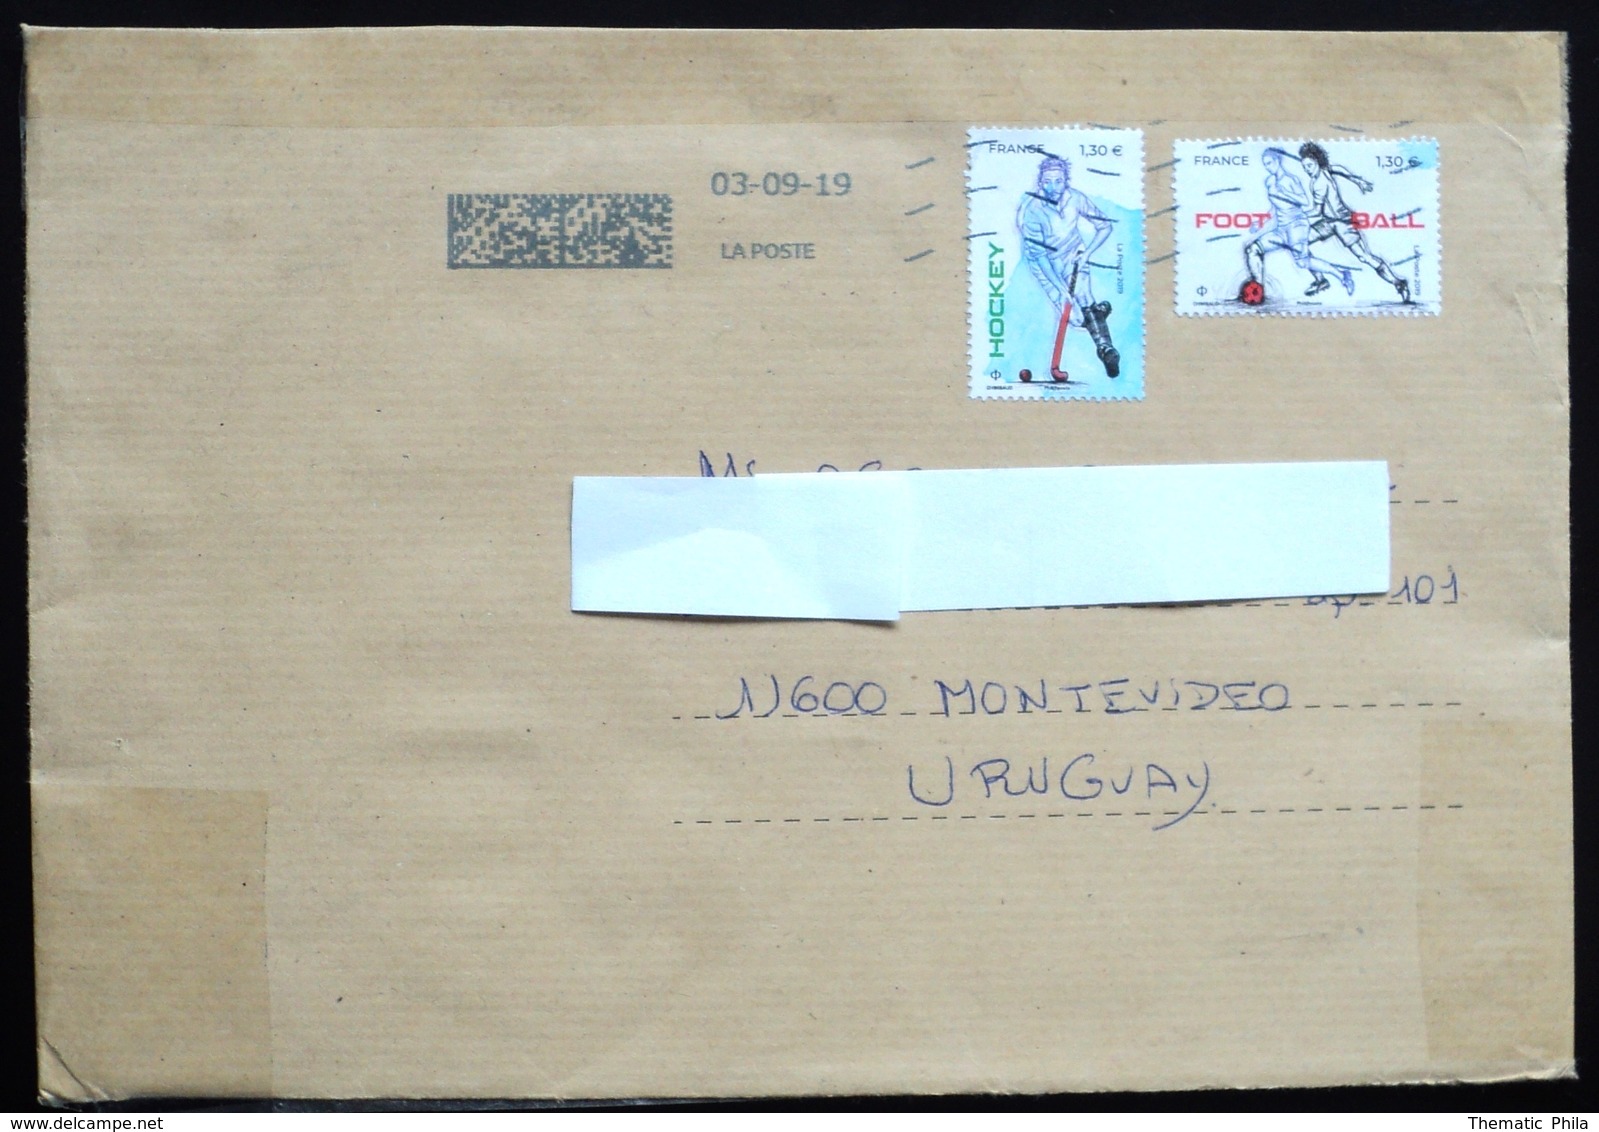 2019 France Francia Large Circulated Cover Envelope To Montevideo Uruguay Sport Hockey Football Futbol - Covers & Documents